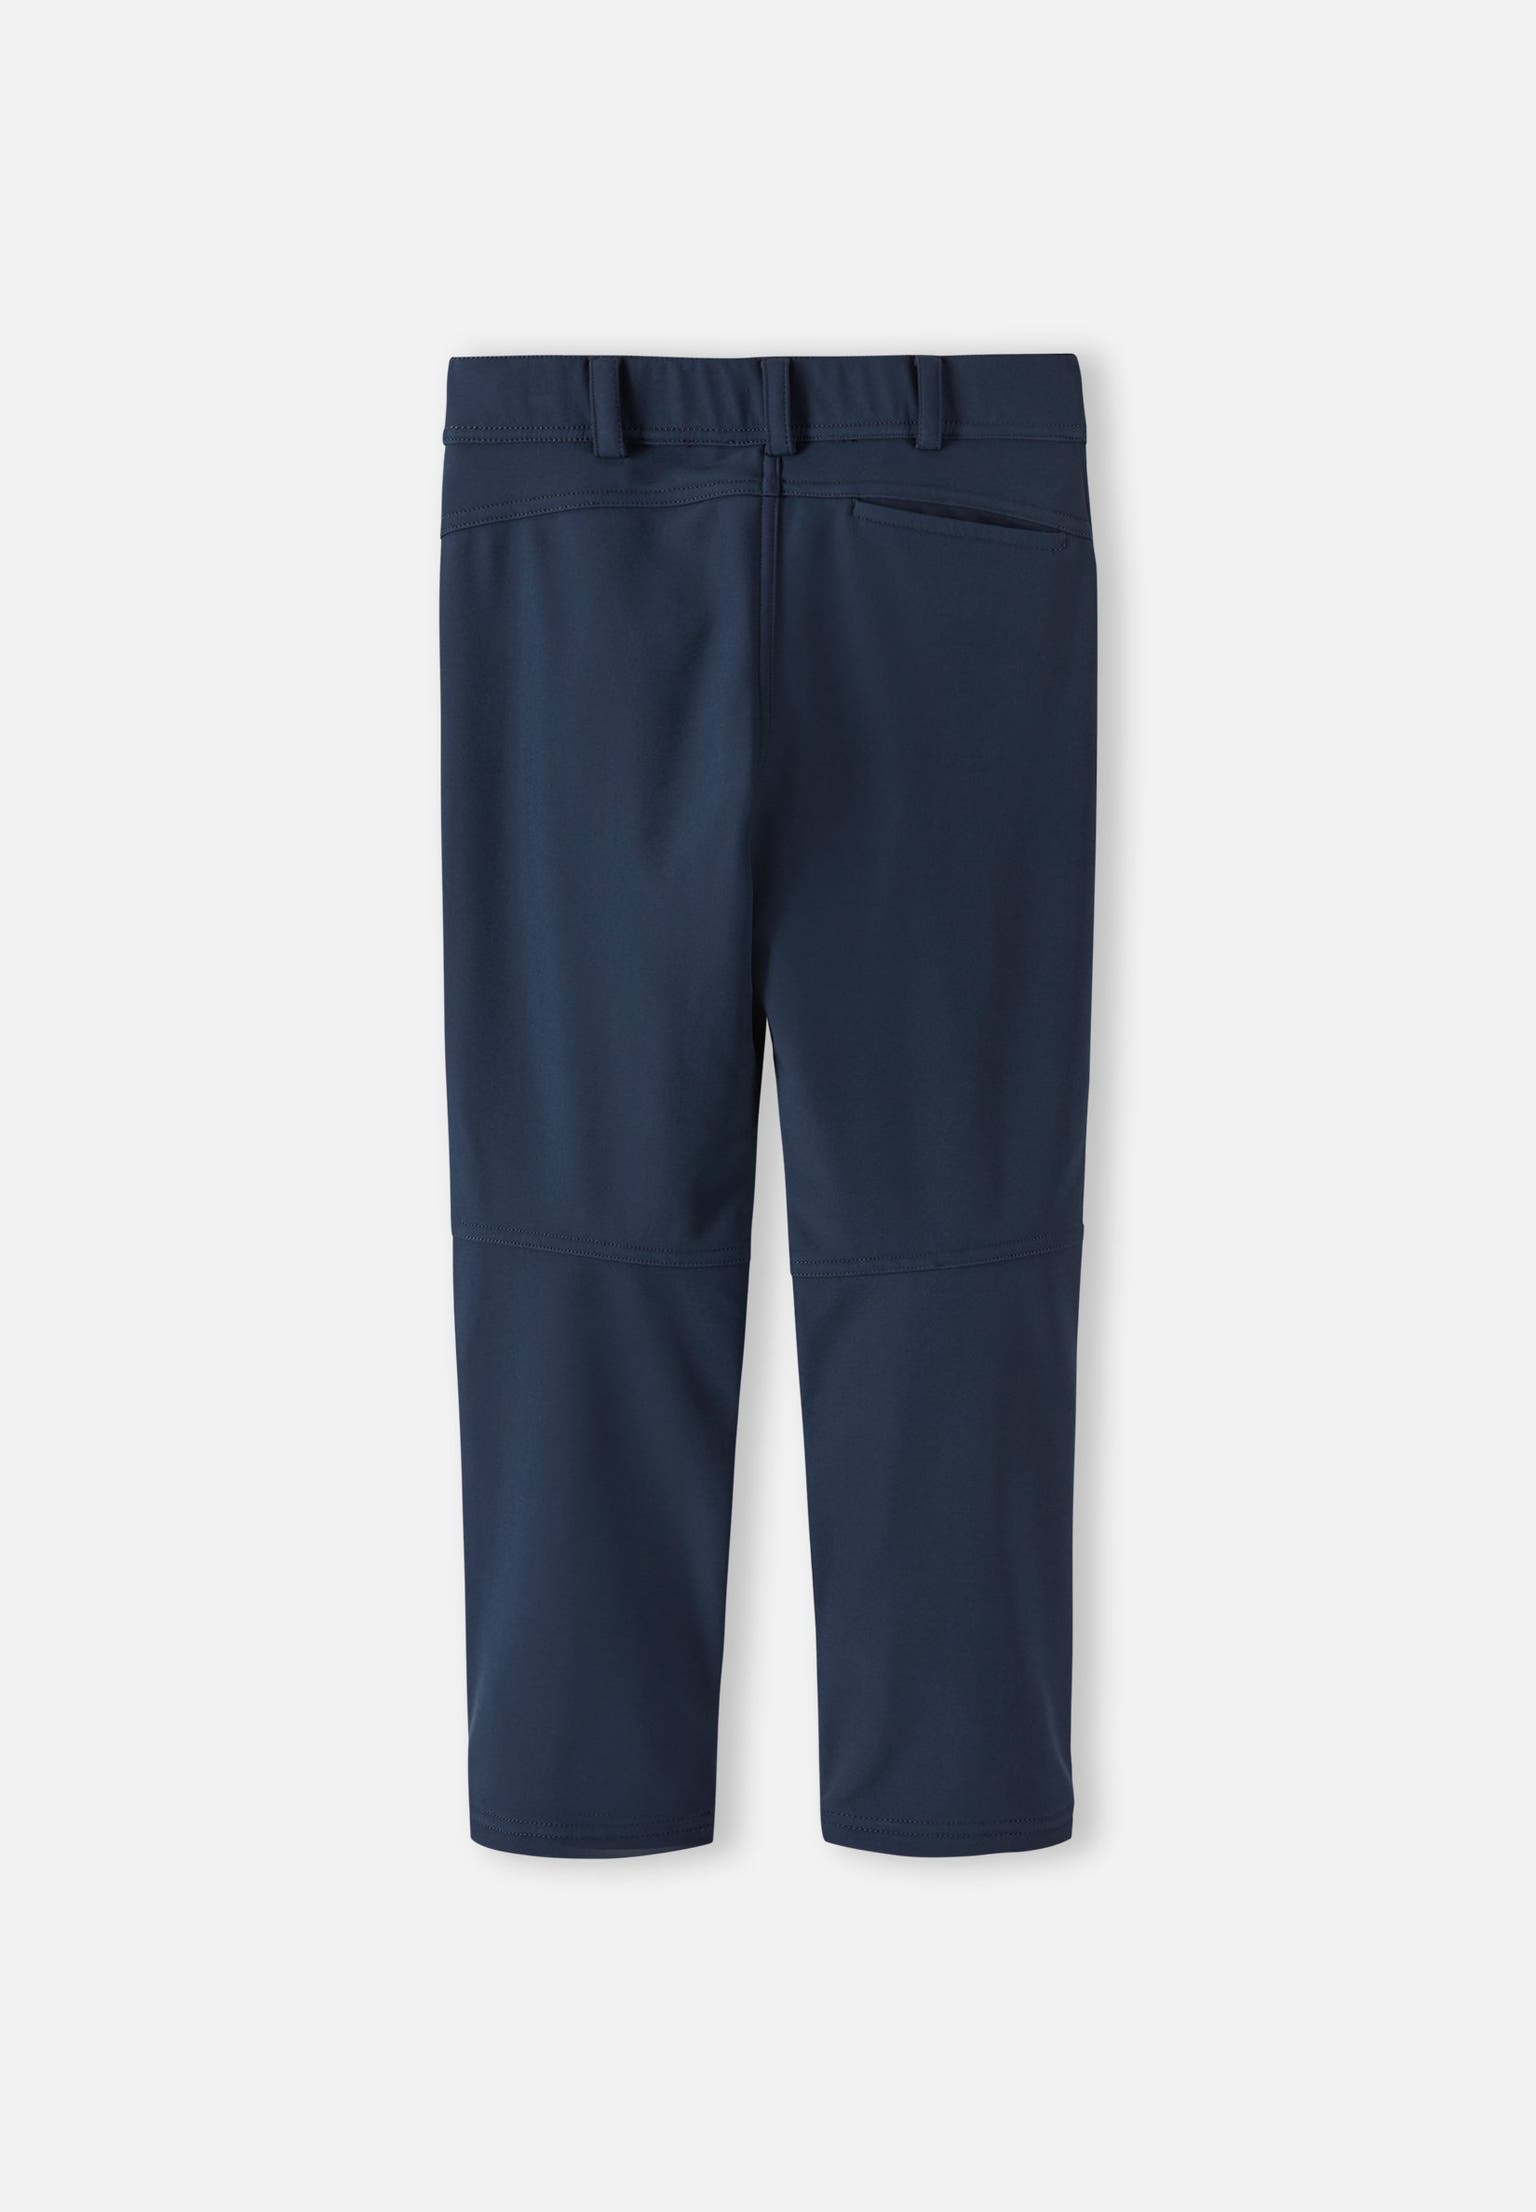 The Best Fleece-Lined Pants for the Outdoors